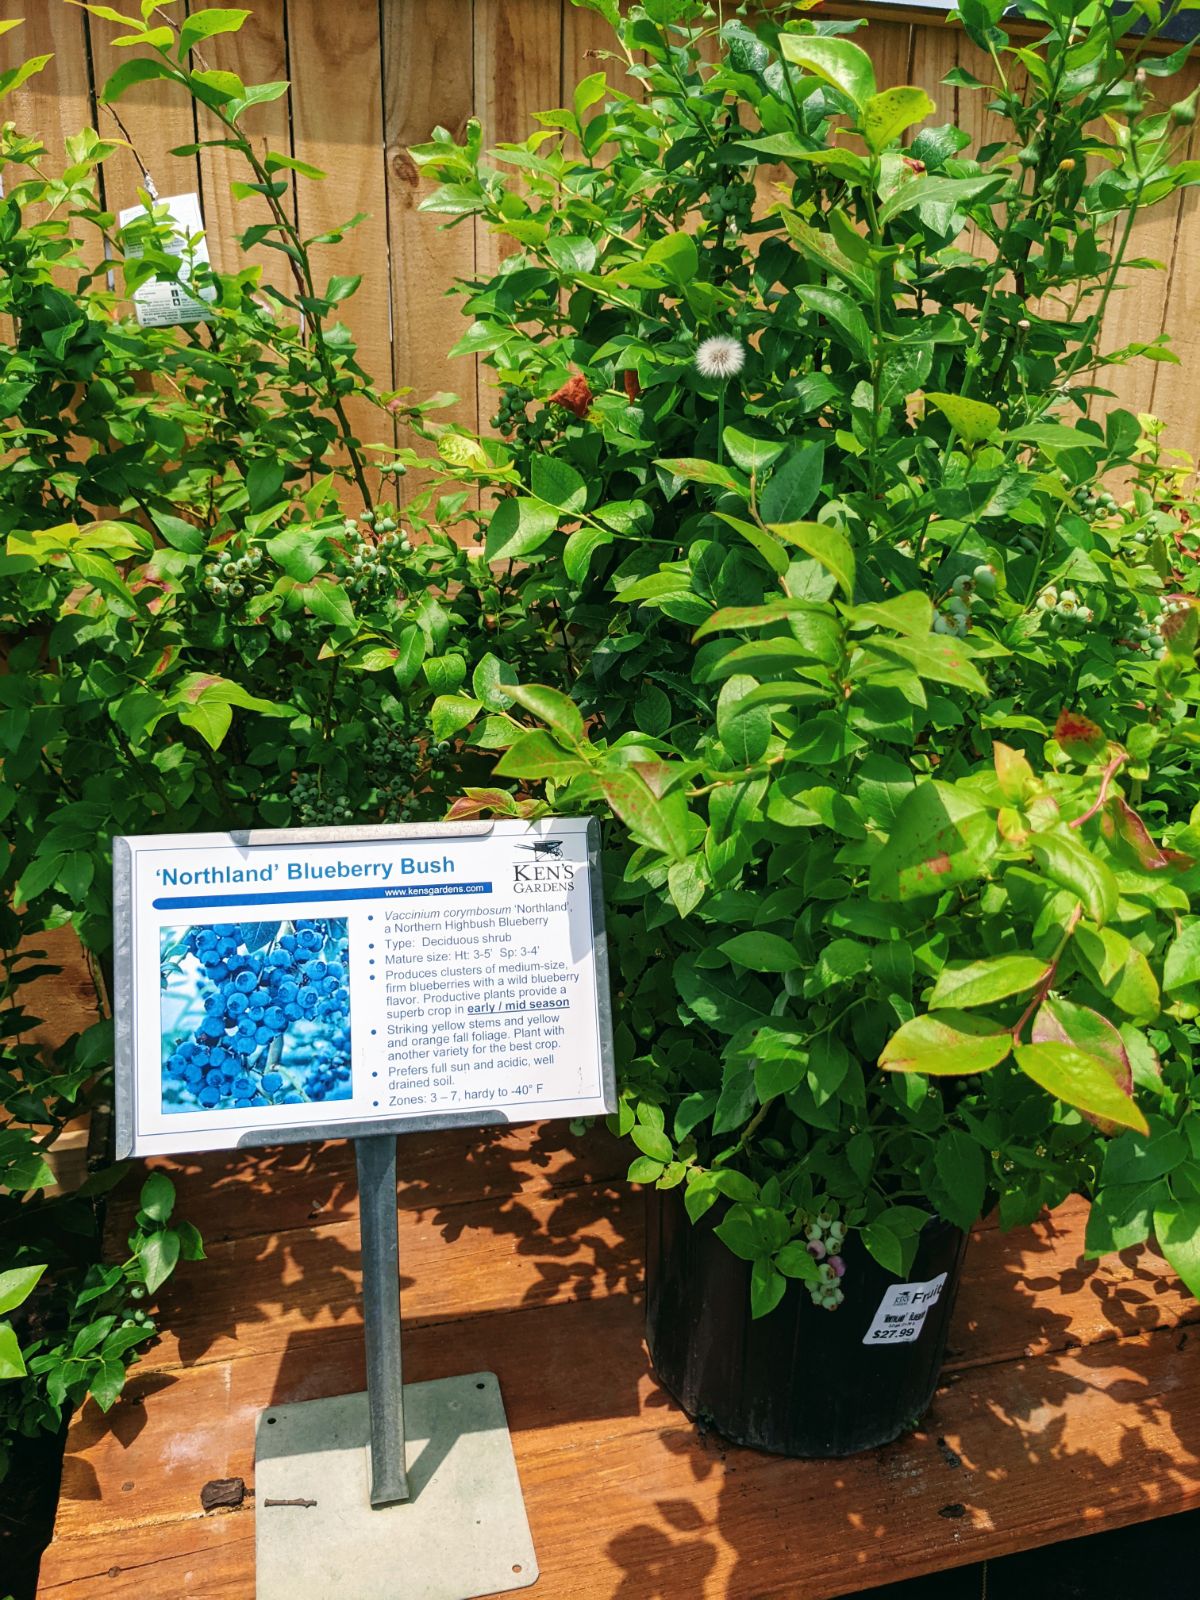 Large Northland Blueberry bushes for sale at Ken's Gardens in Lancaster, PA